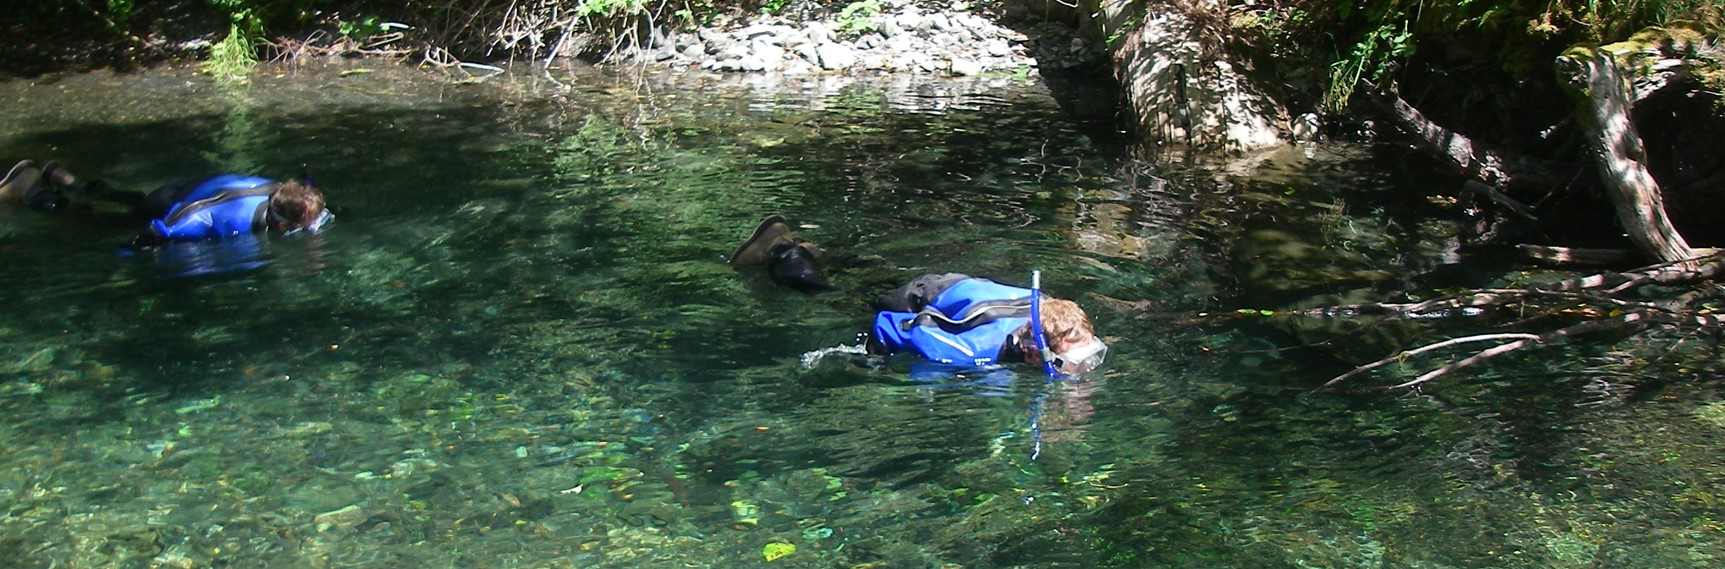 An image of two snorkelers in a clear pool